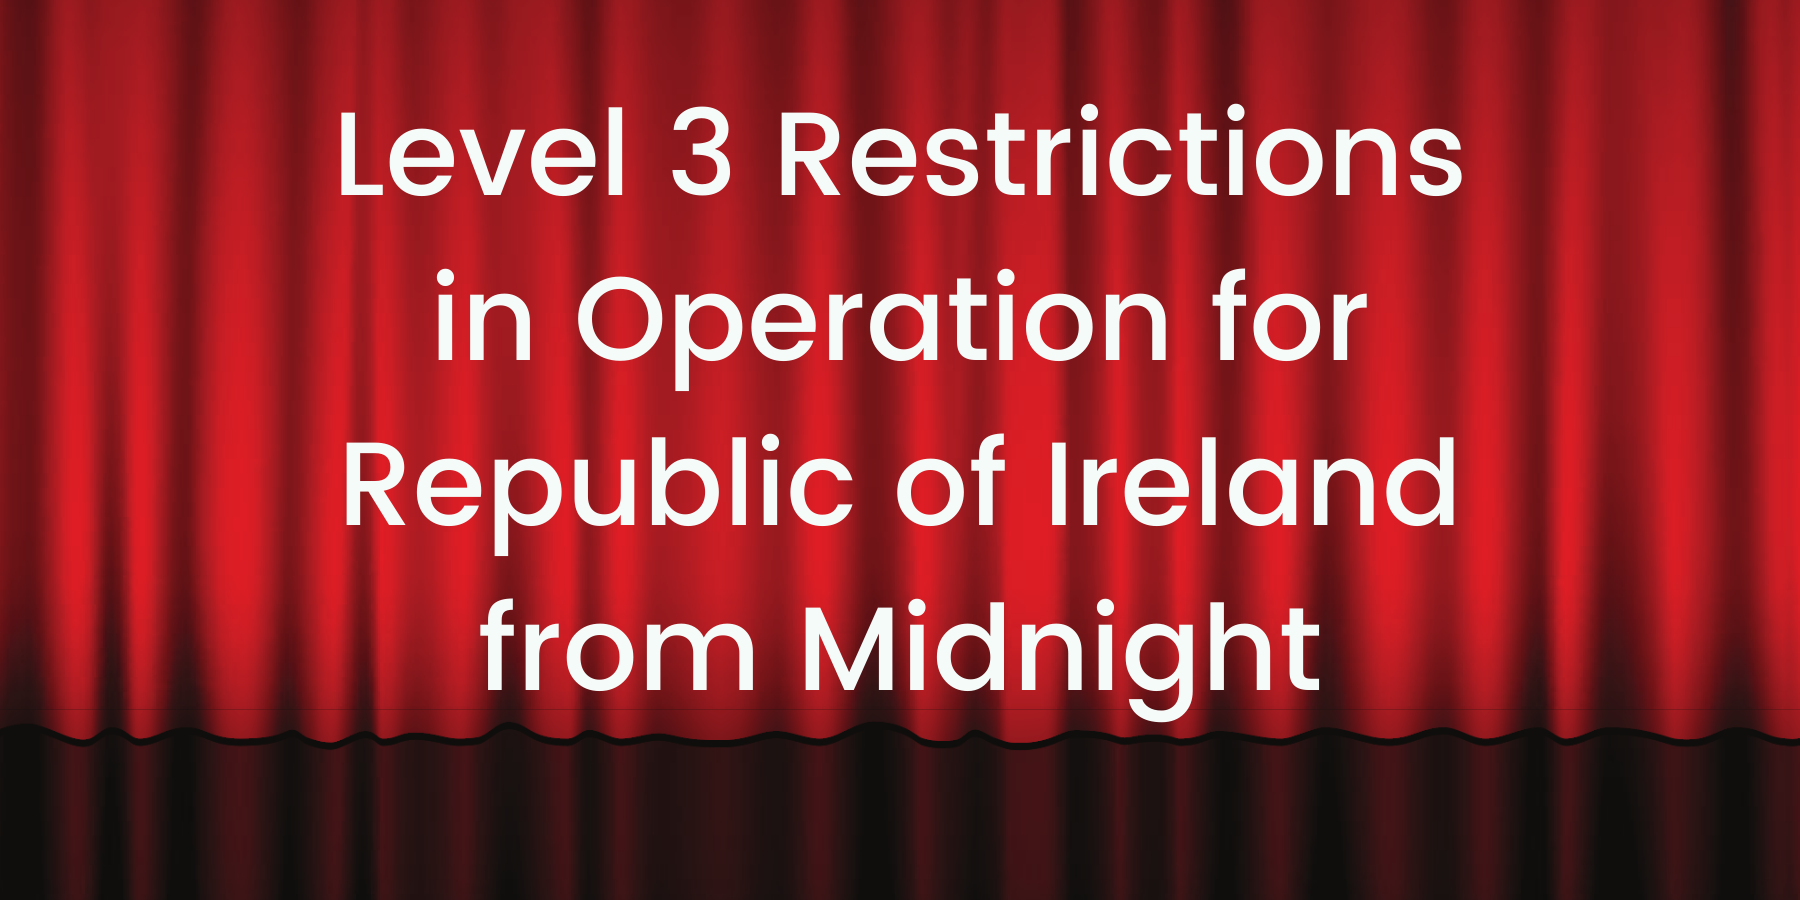 Level 3 restrictions in operation for the Republic of Ireland from midnight